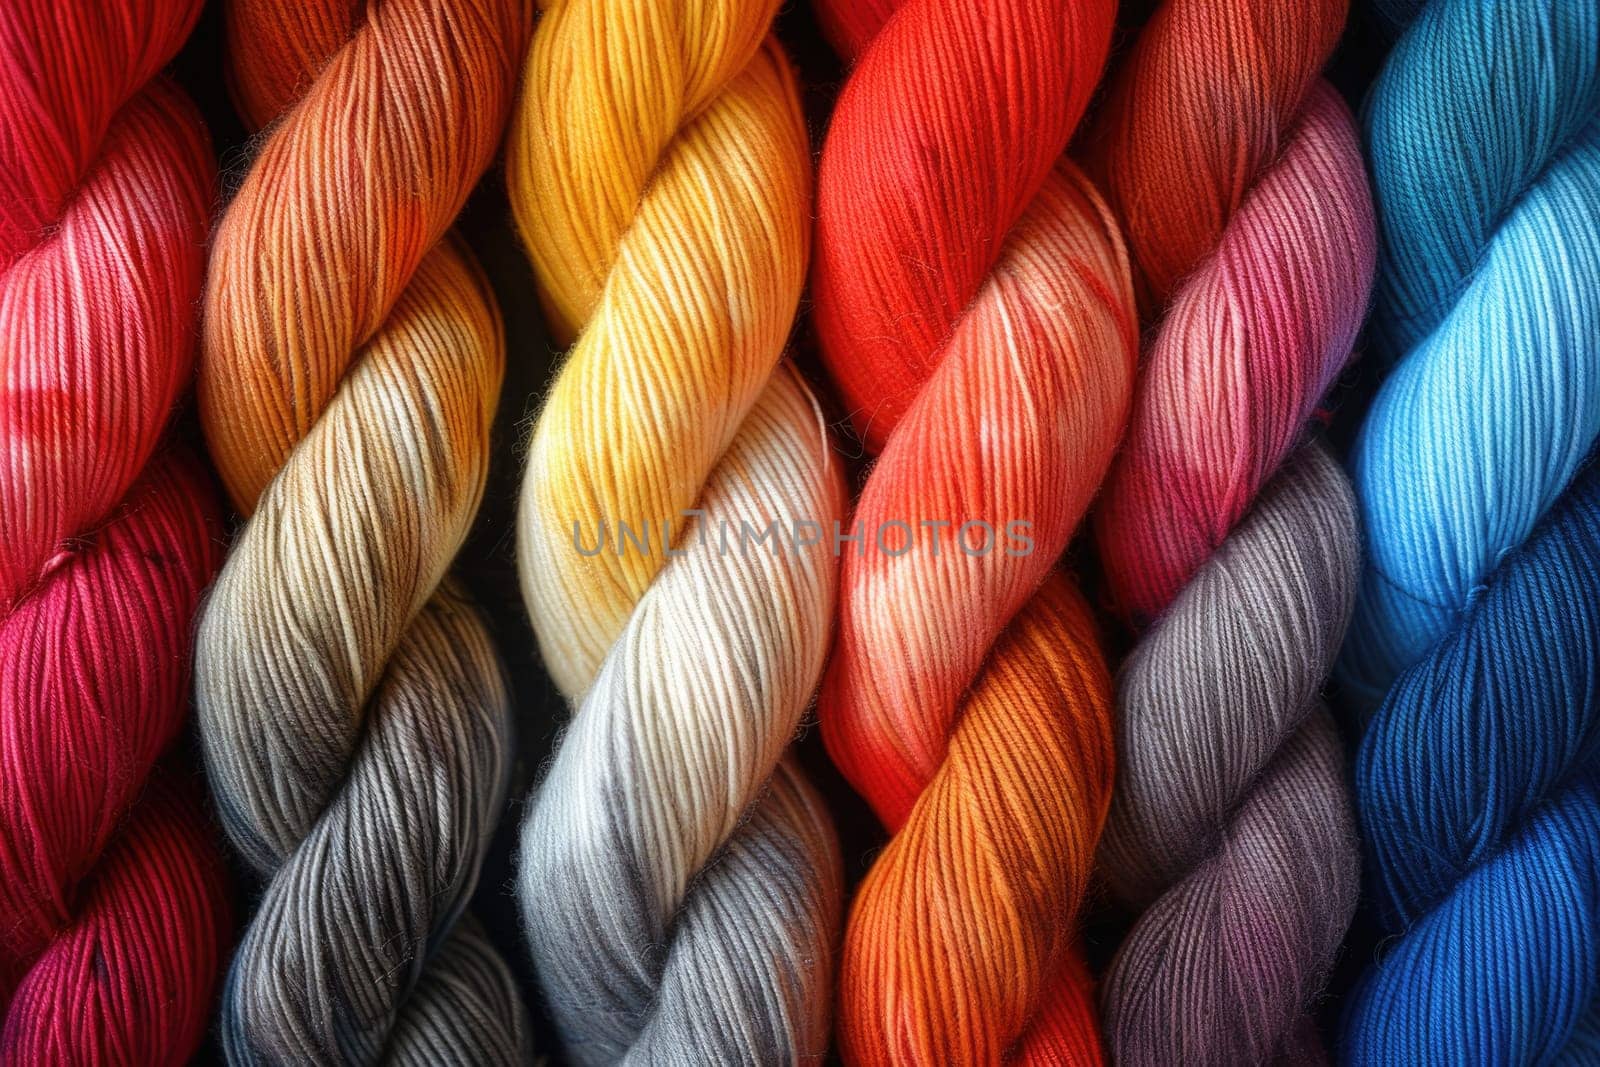 Close-up view of a collection of yarn skeins in different colors, neatly arranged.